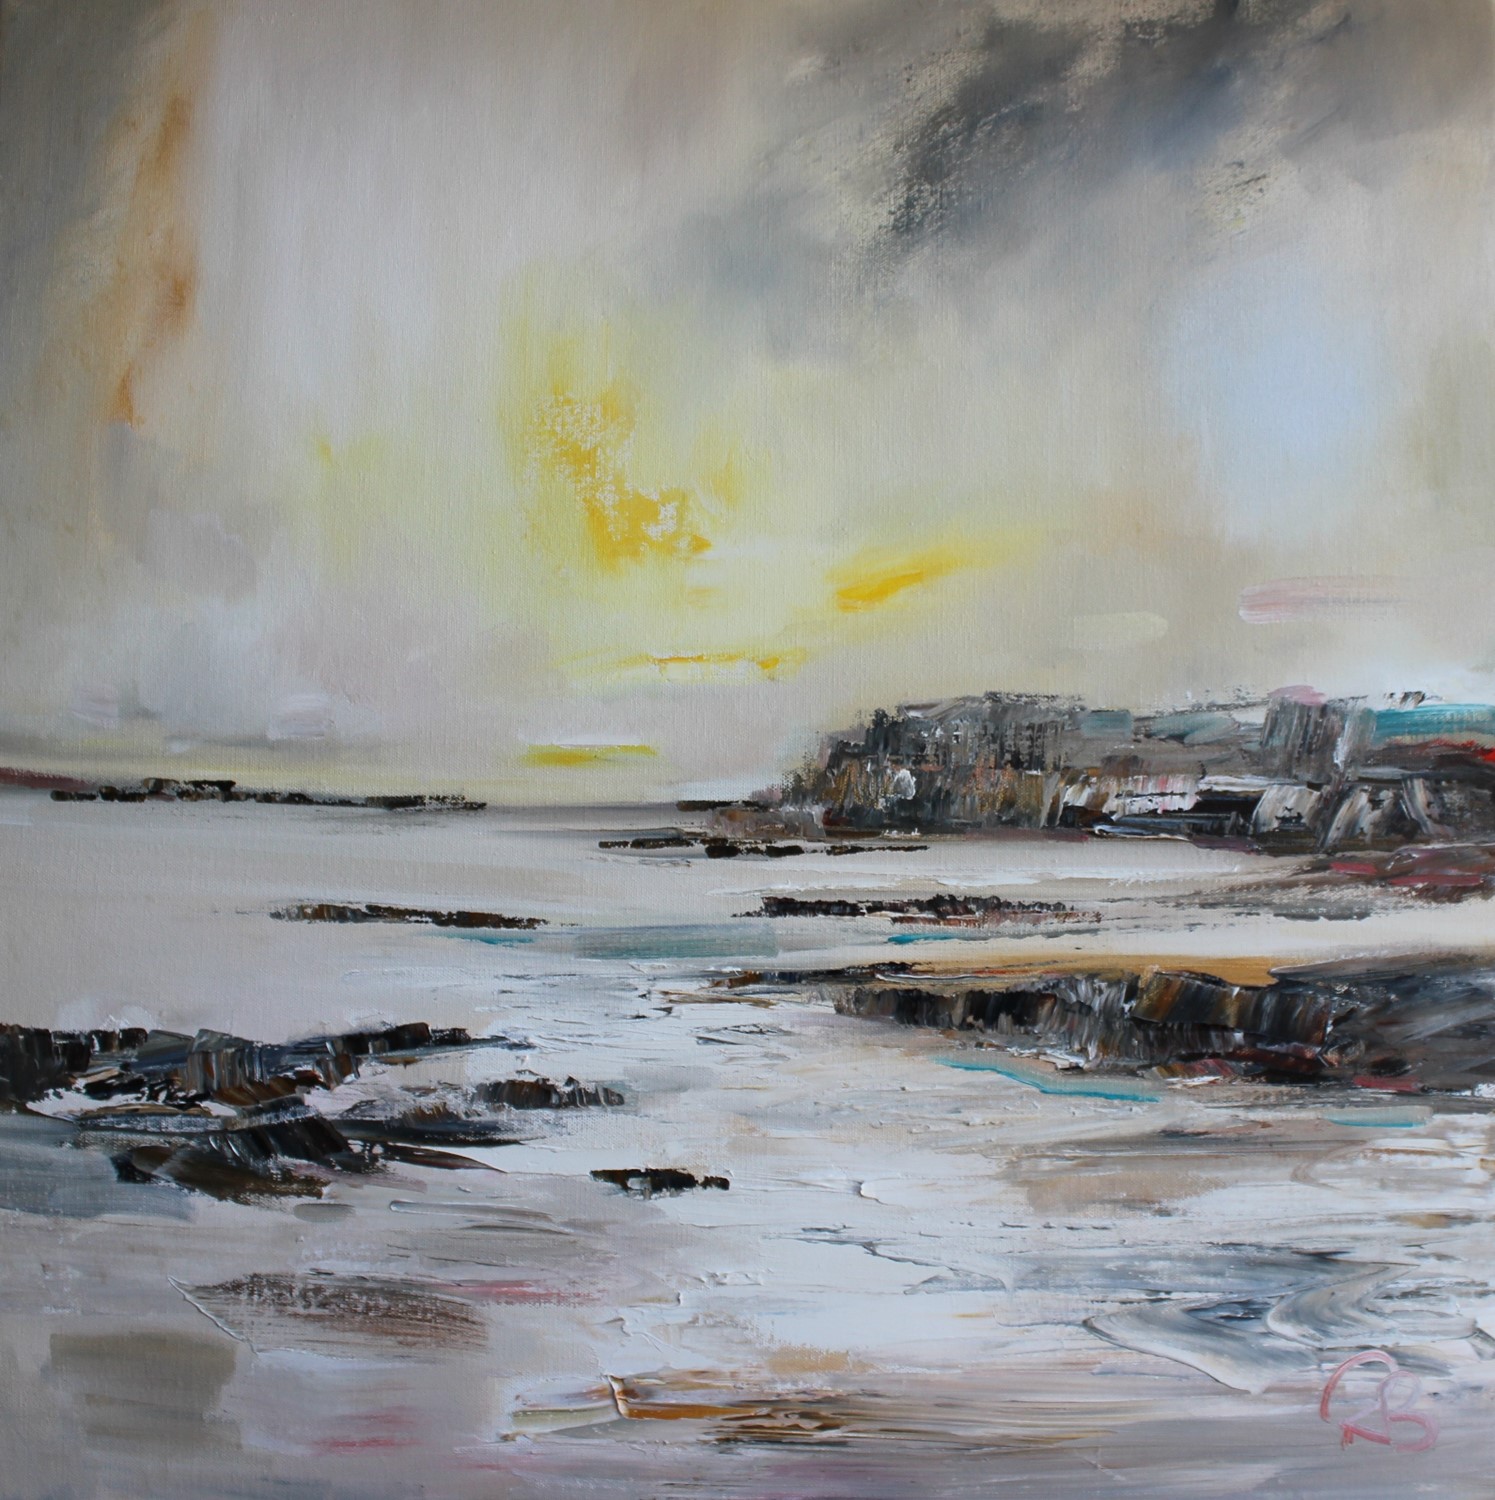 'A Tidal River on the West Coast' by artist Rosanne Barr